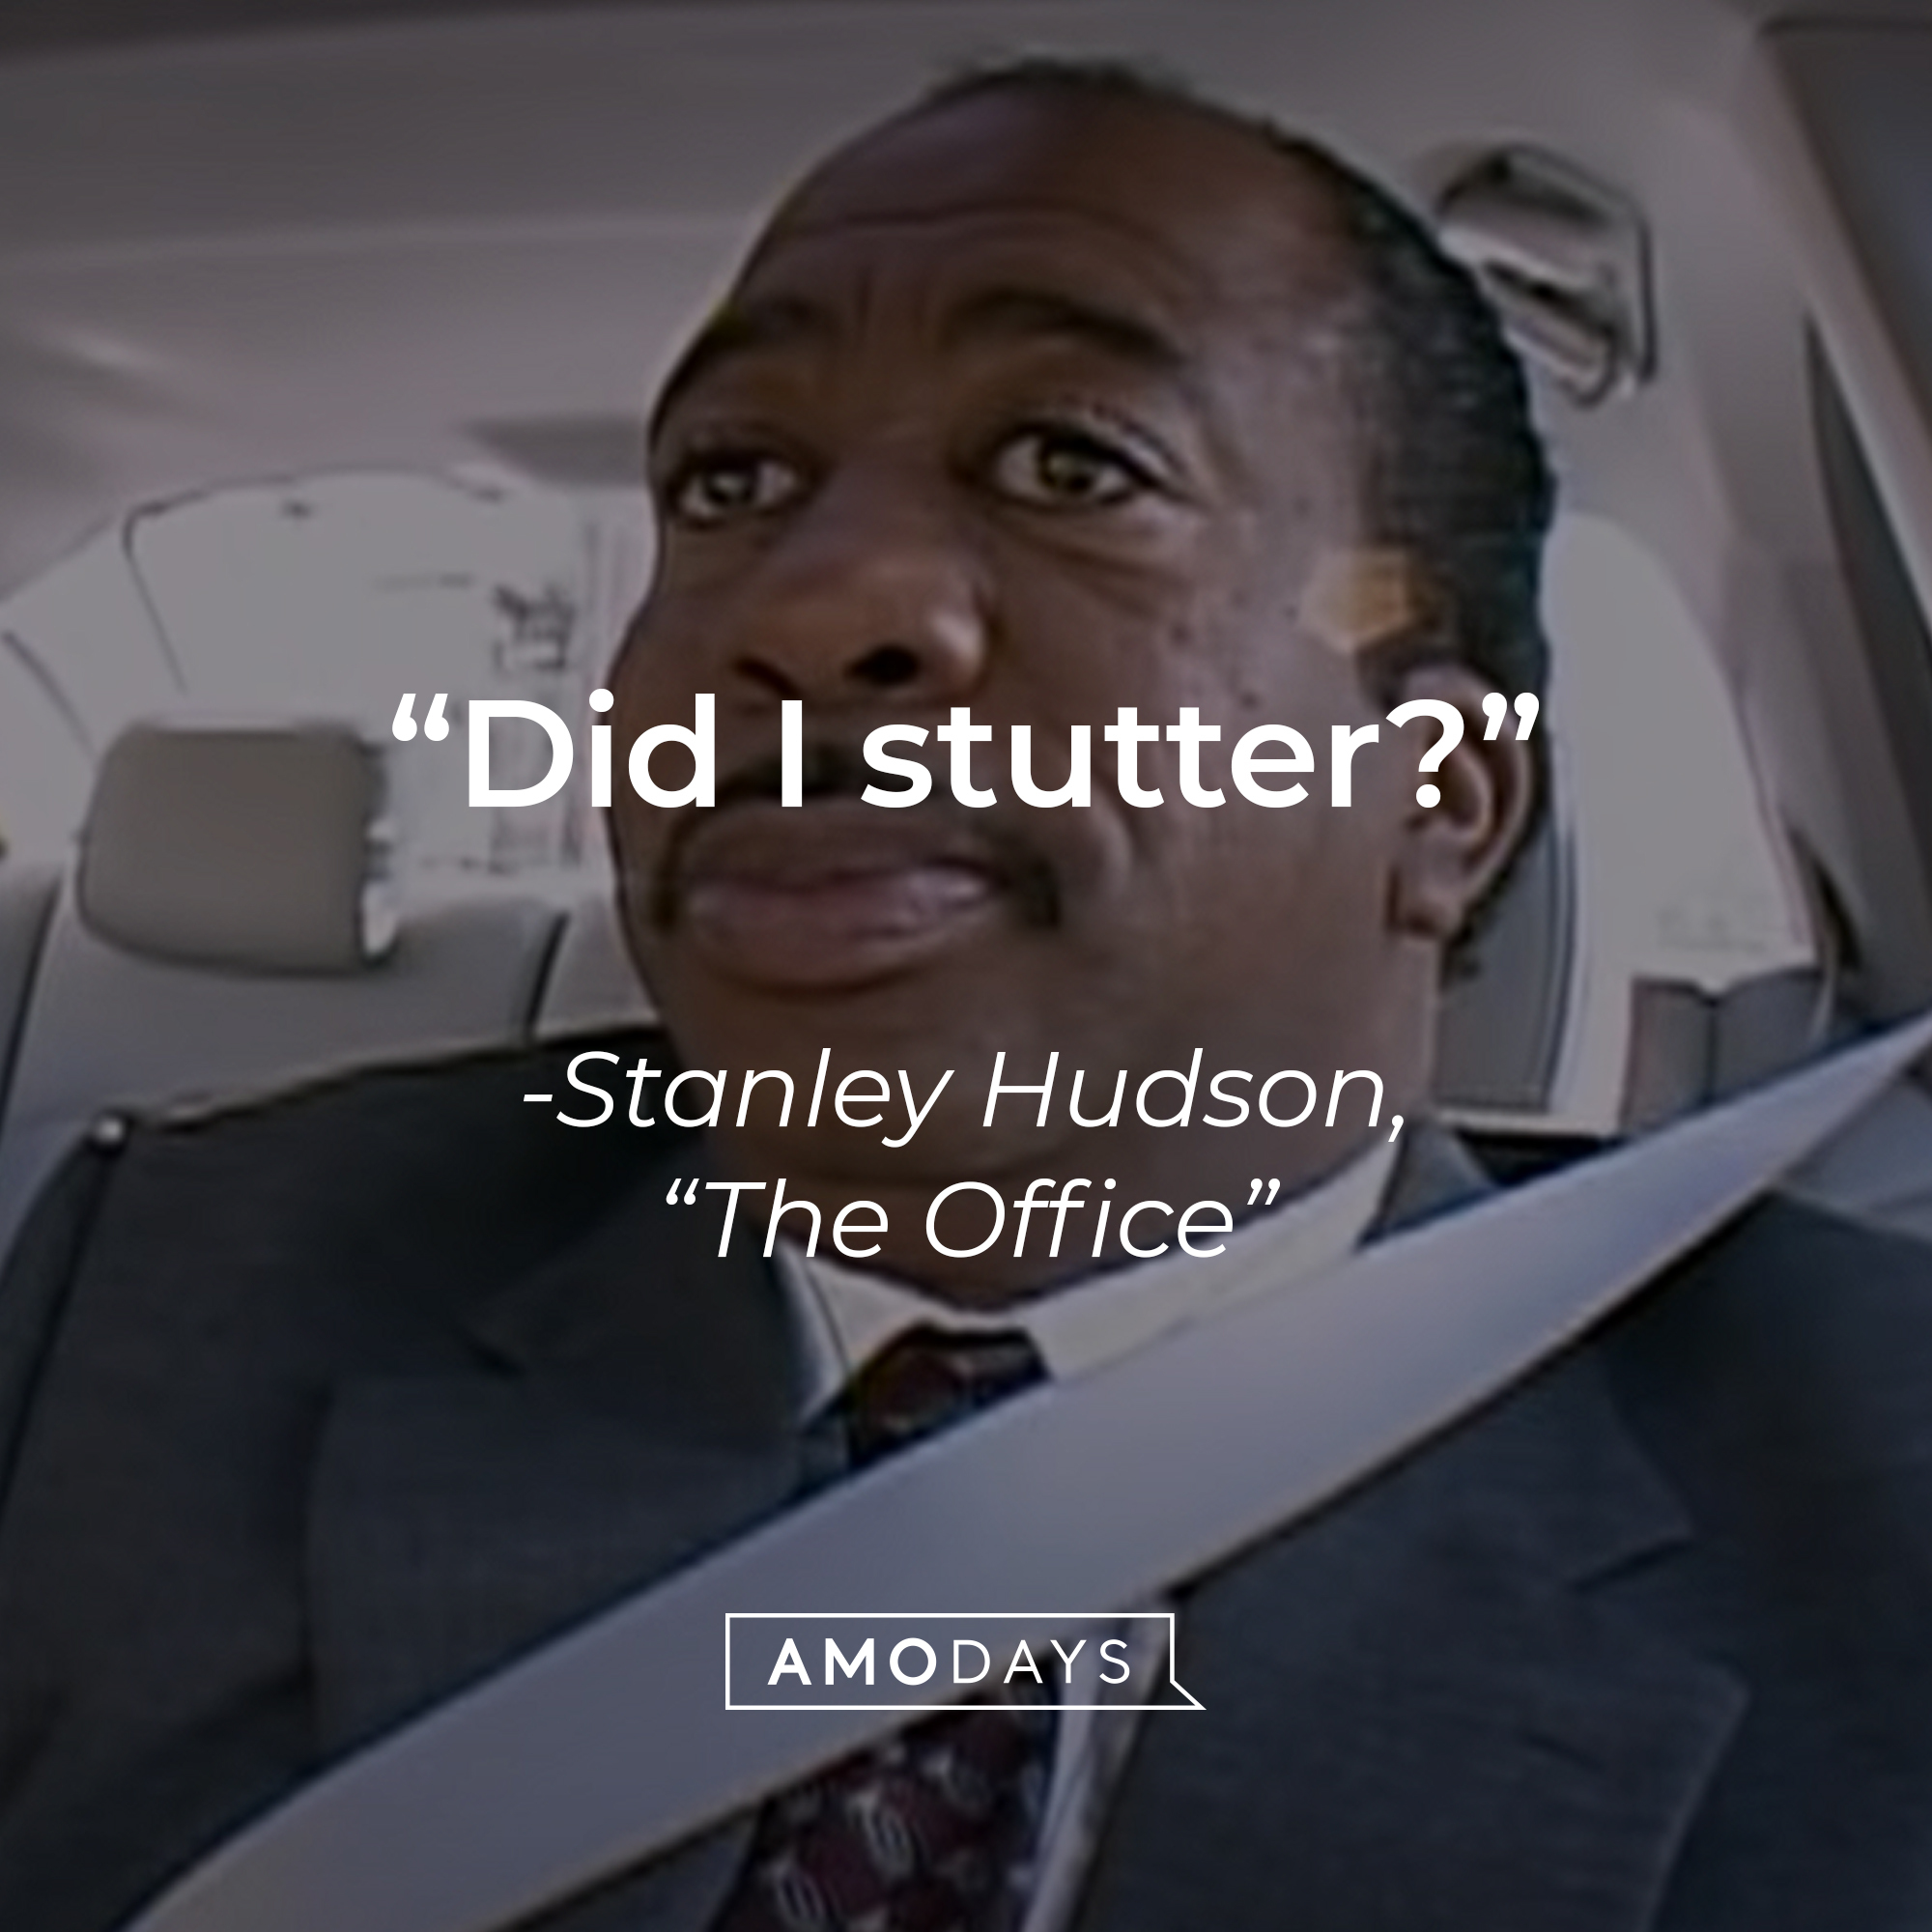 An image of Leslie David Baker as Stanley Hudson in "The Office" with the quote: "Did I stutter?" | Source: youtube.com/The Office